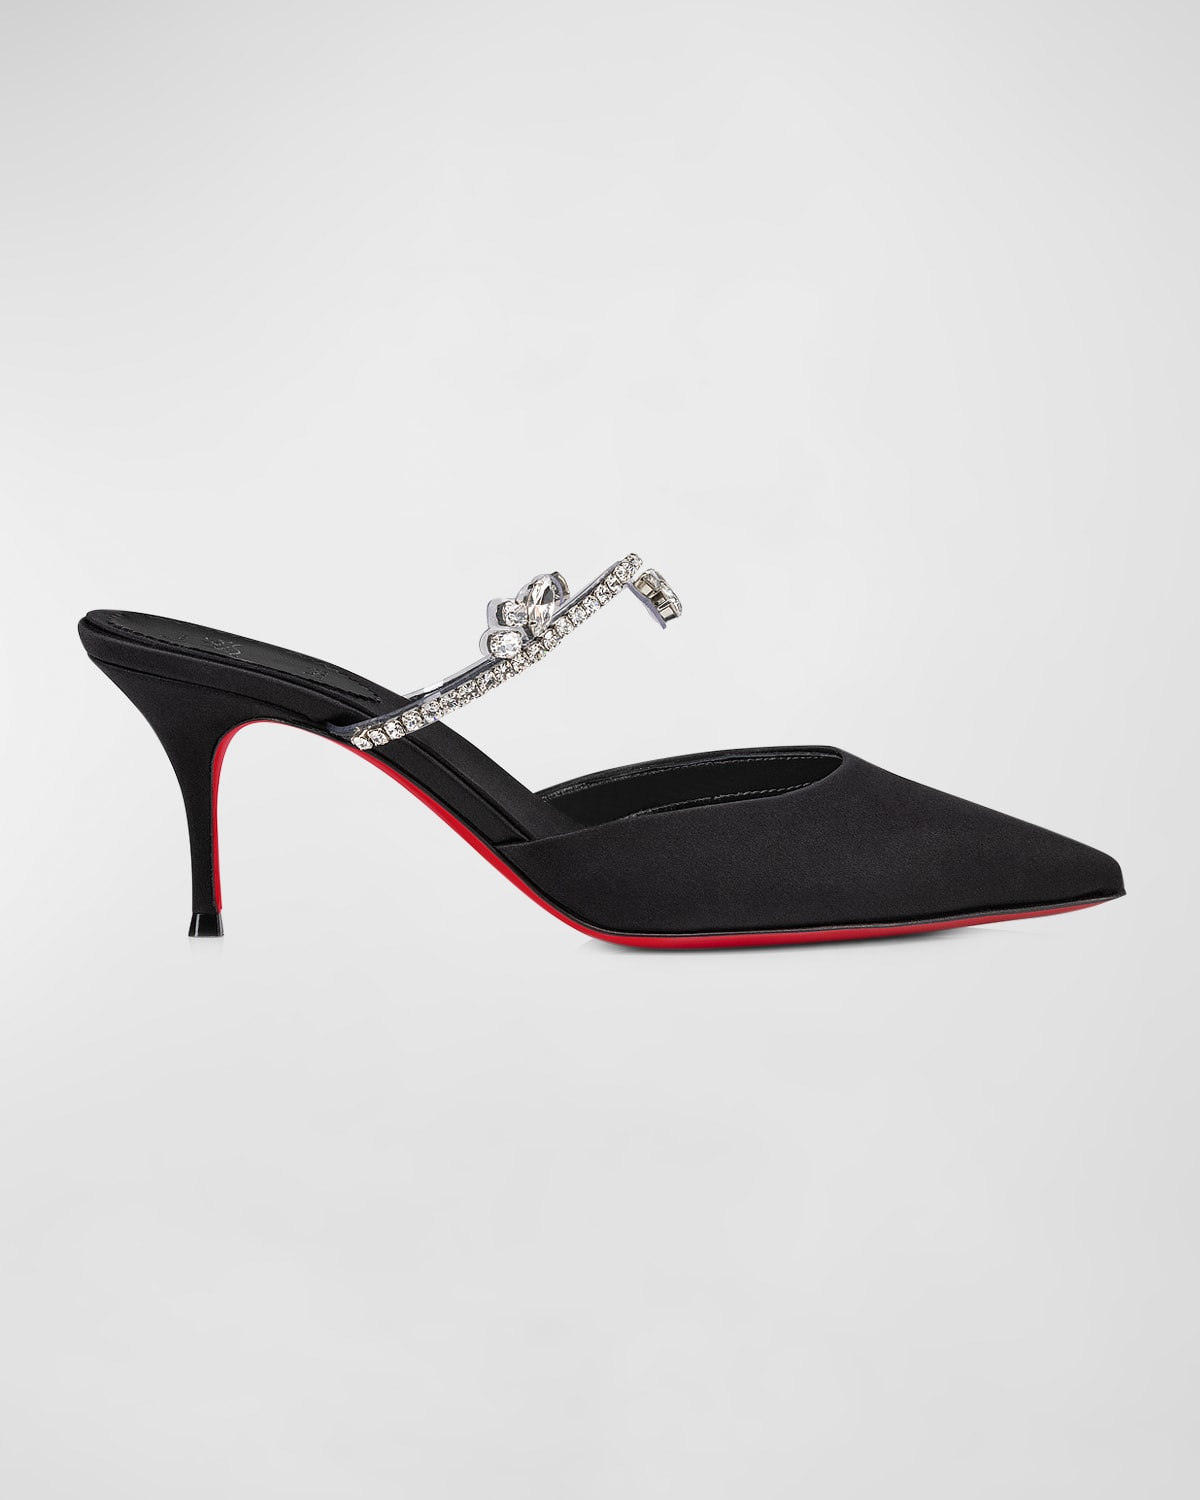 CHRISTIAN LOUBOUTIN PLANET QUEEN EMBELLISHED RED SOLE MULE PUMPS